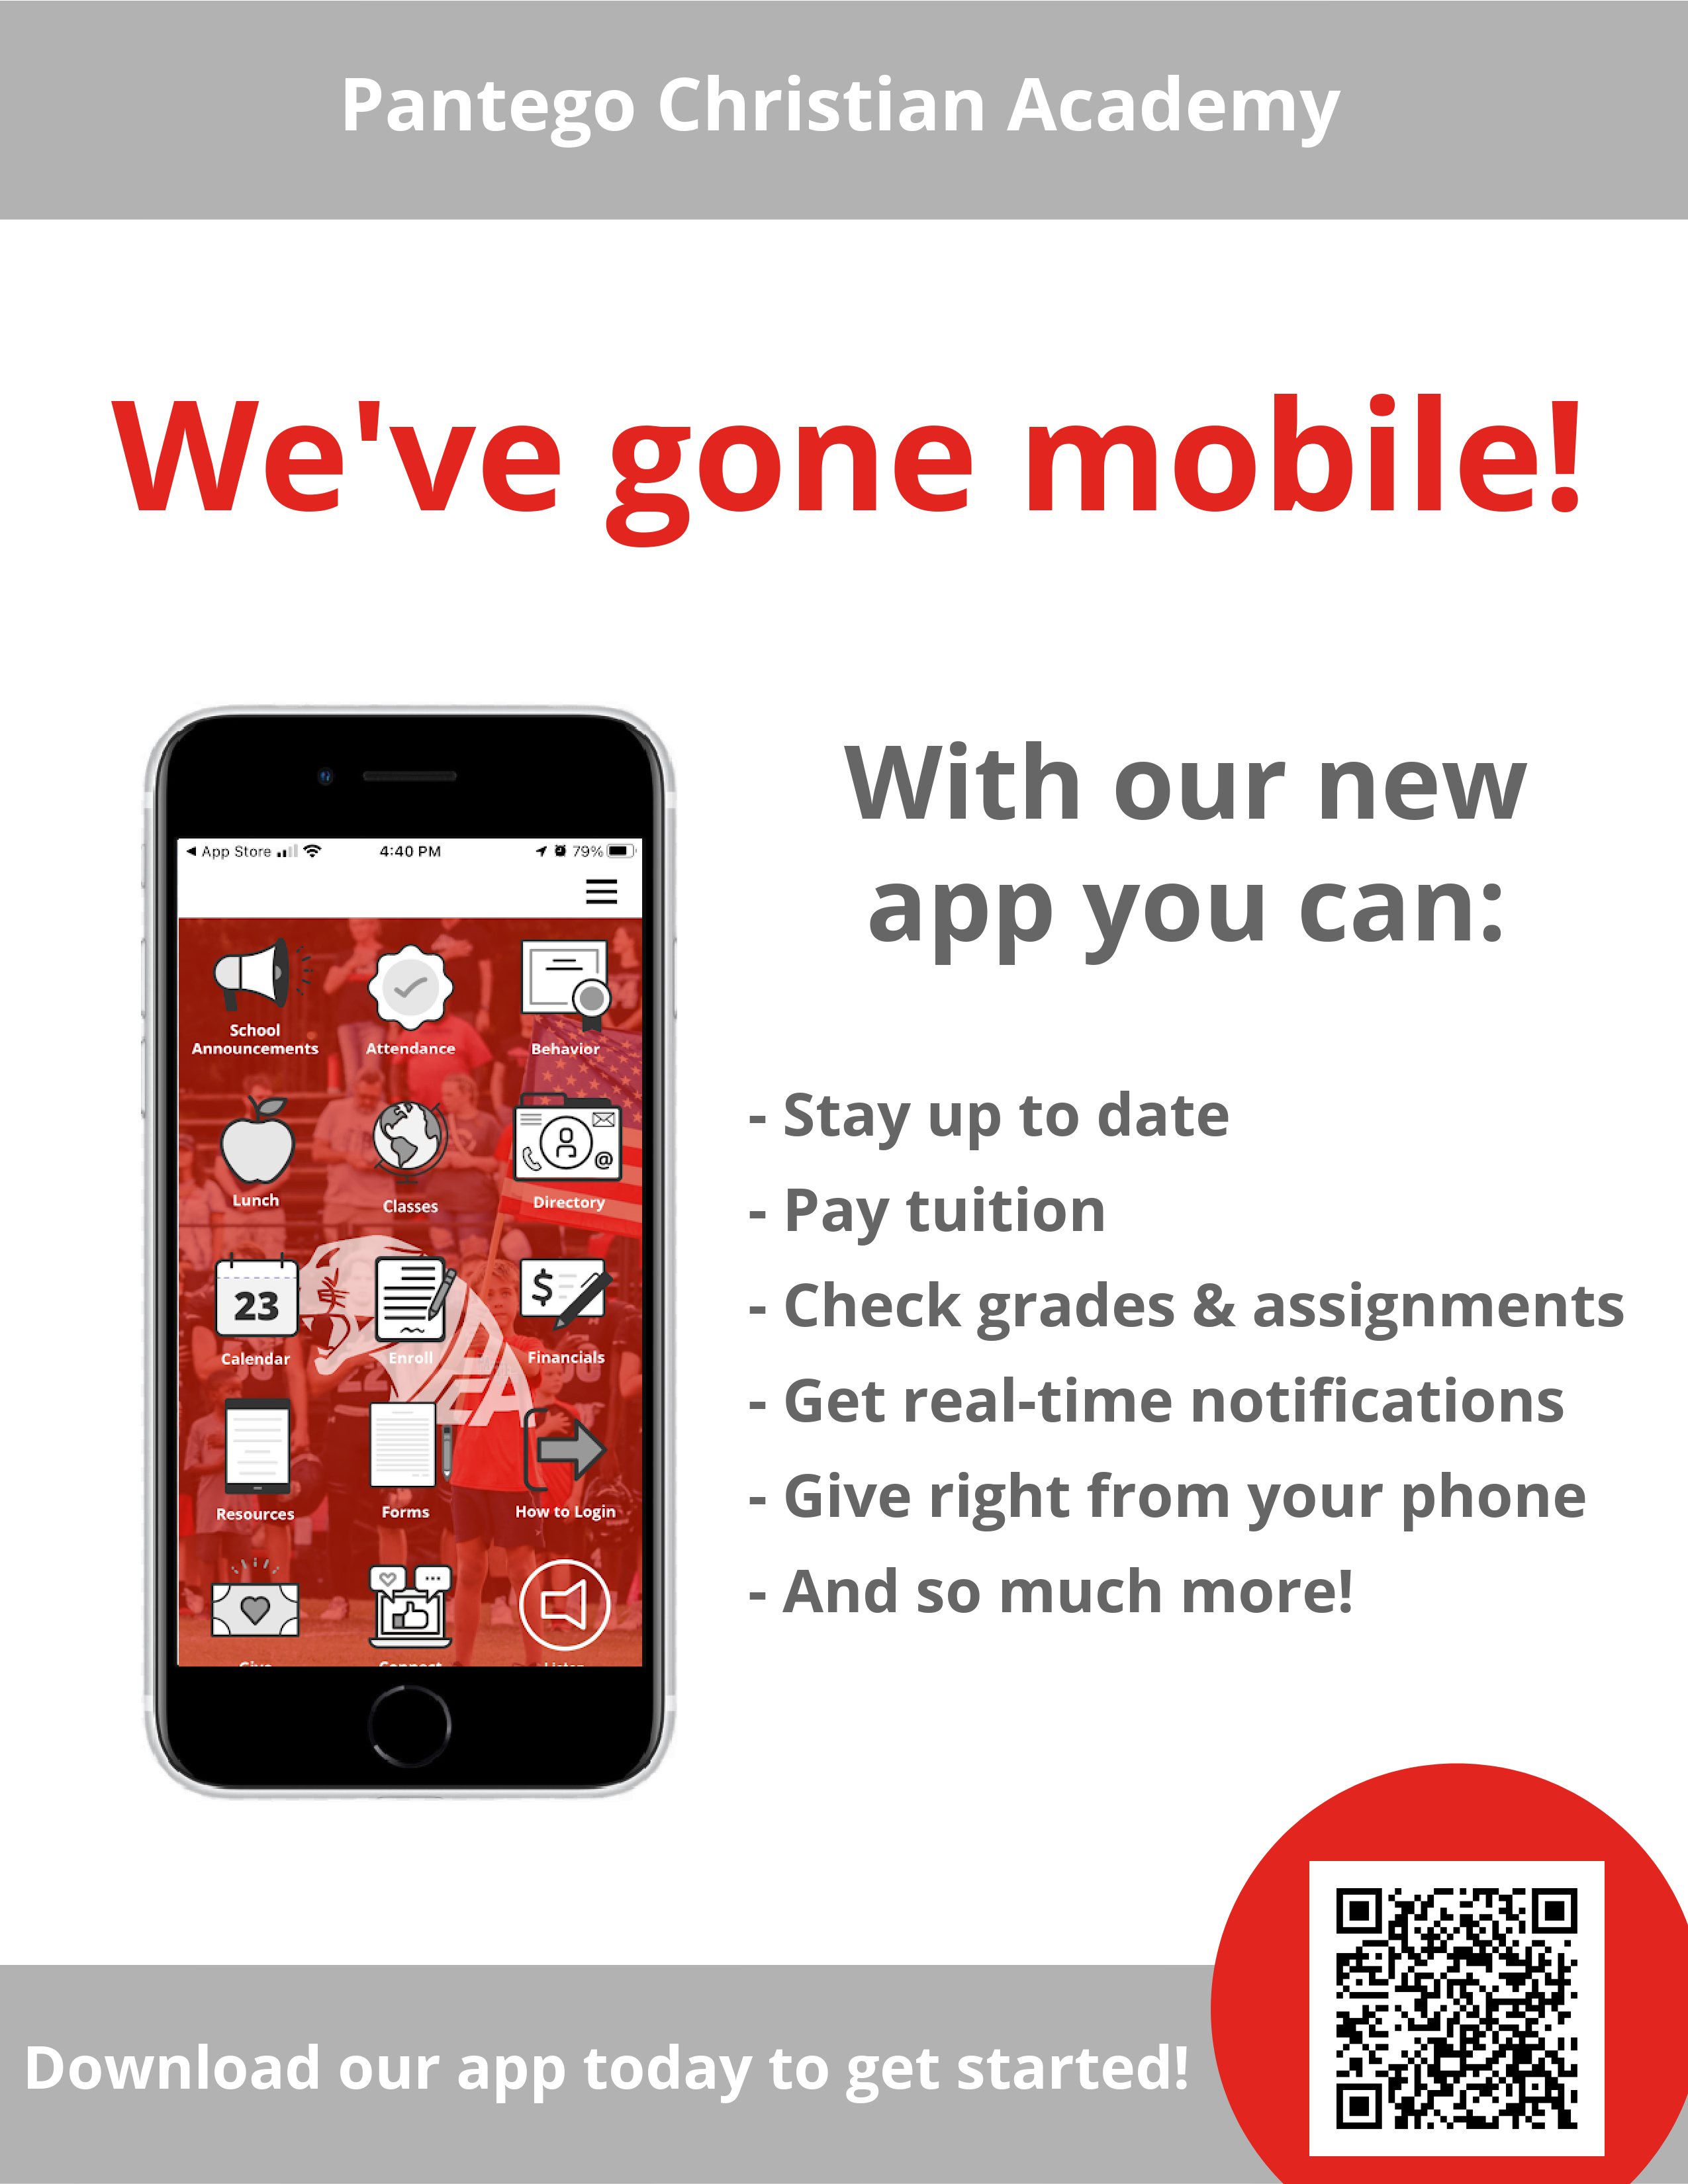 download the new Pantego Christian Academy app from the Apple store or Google Play store